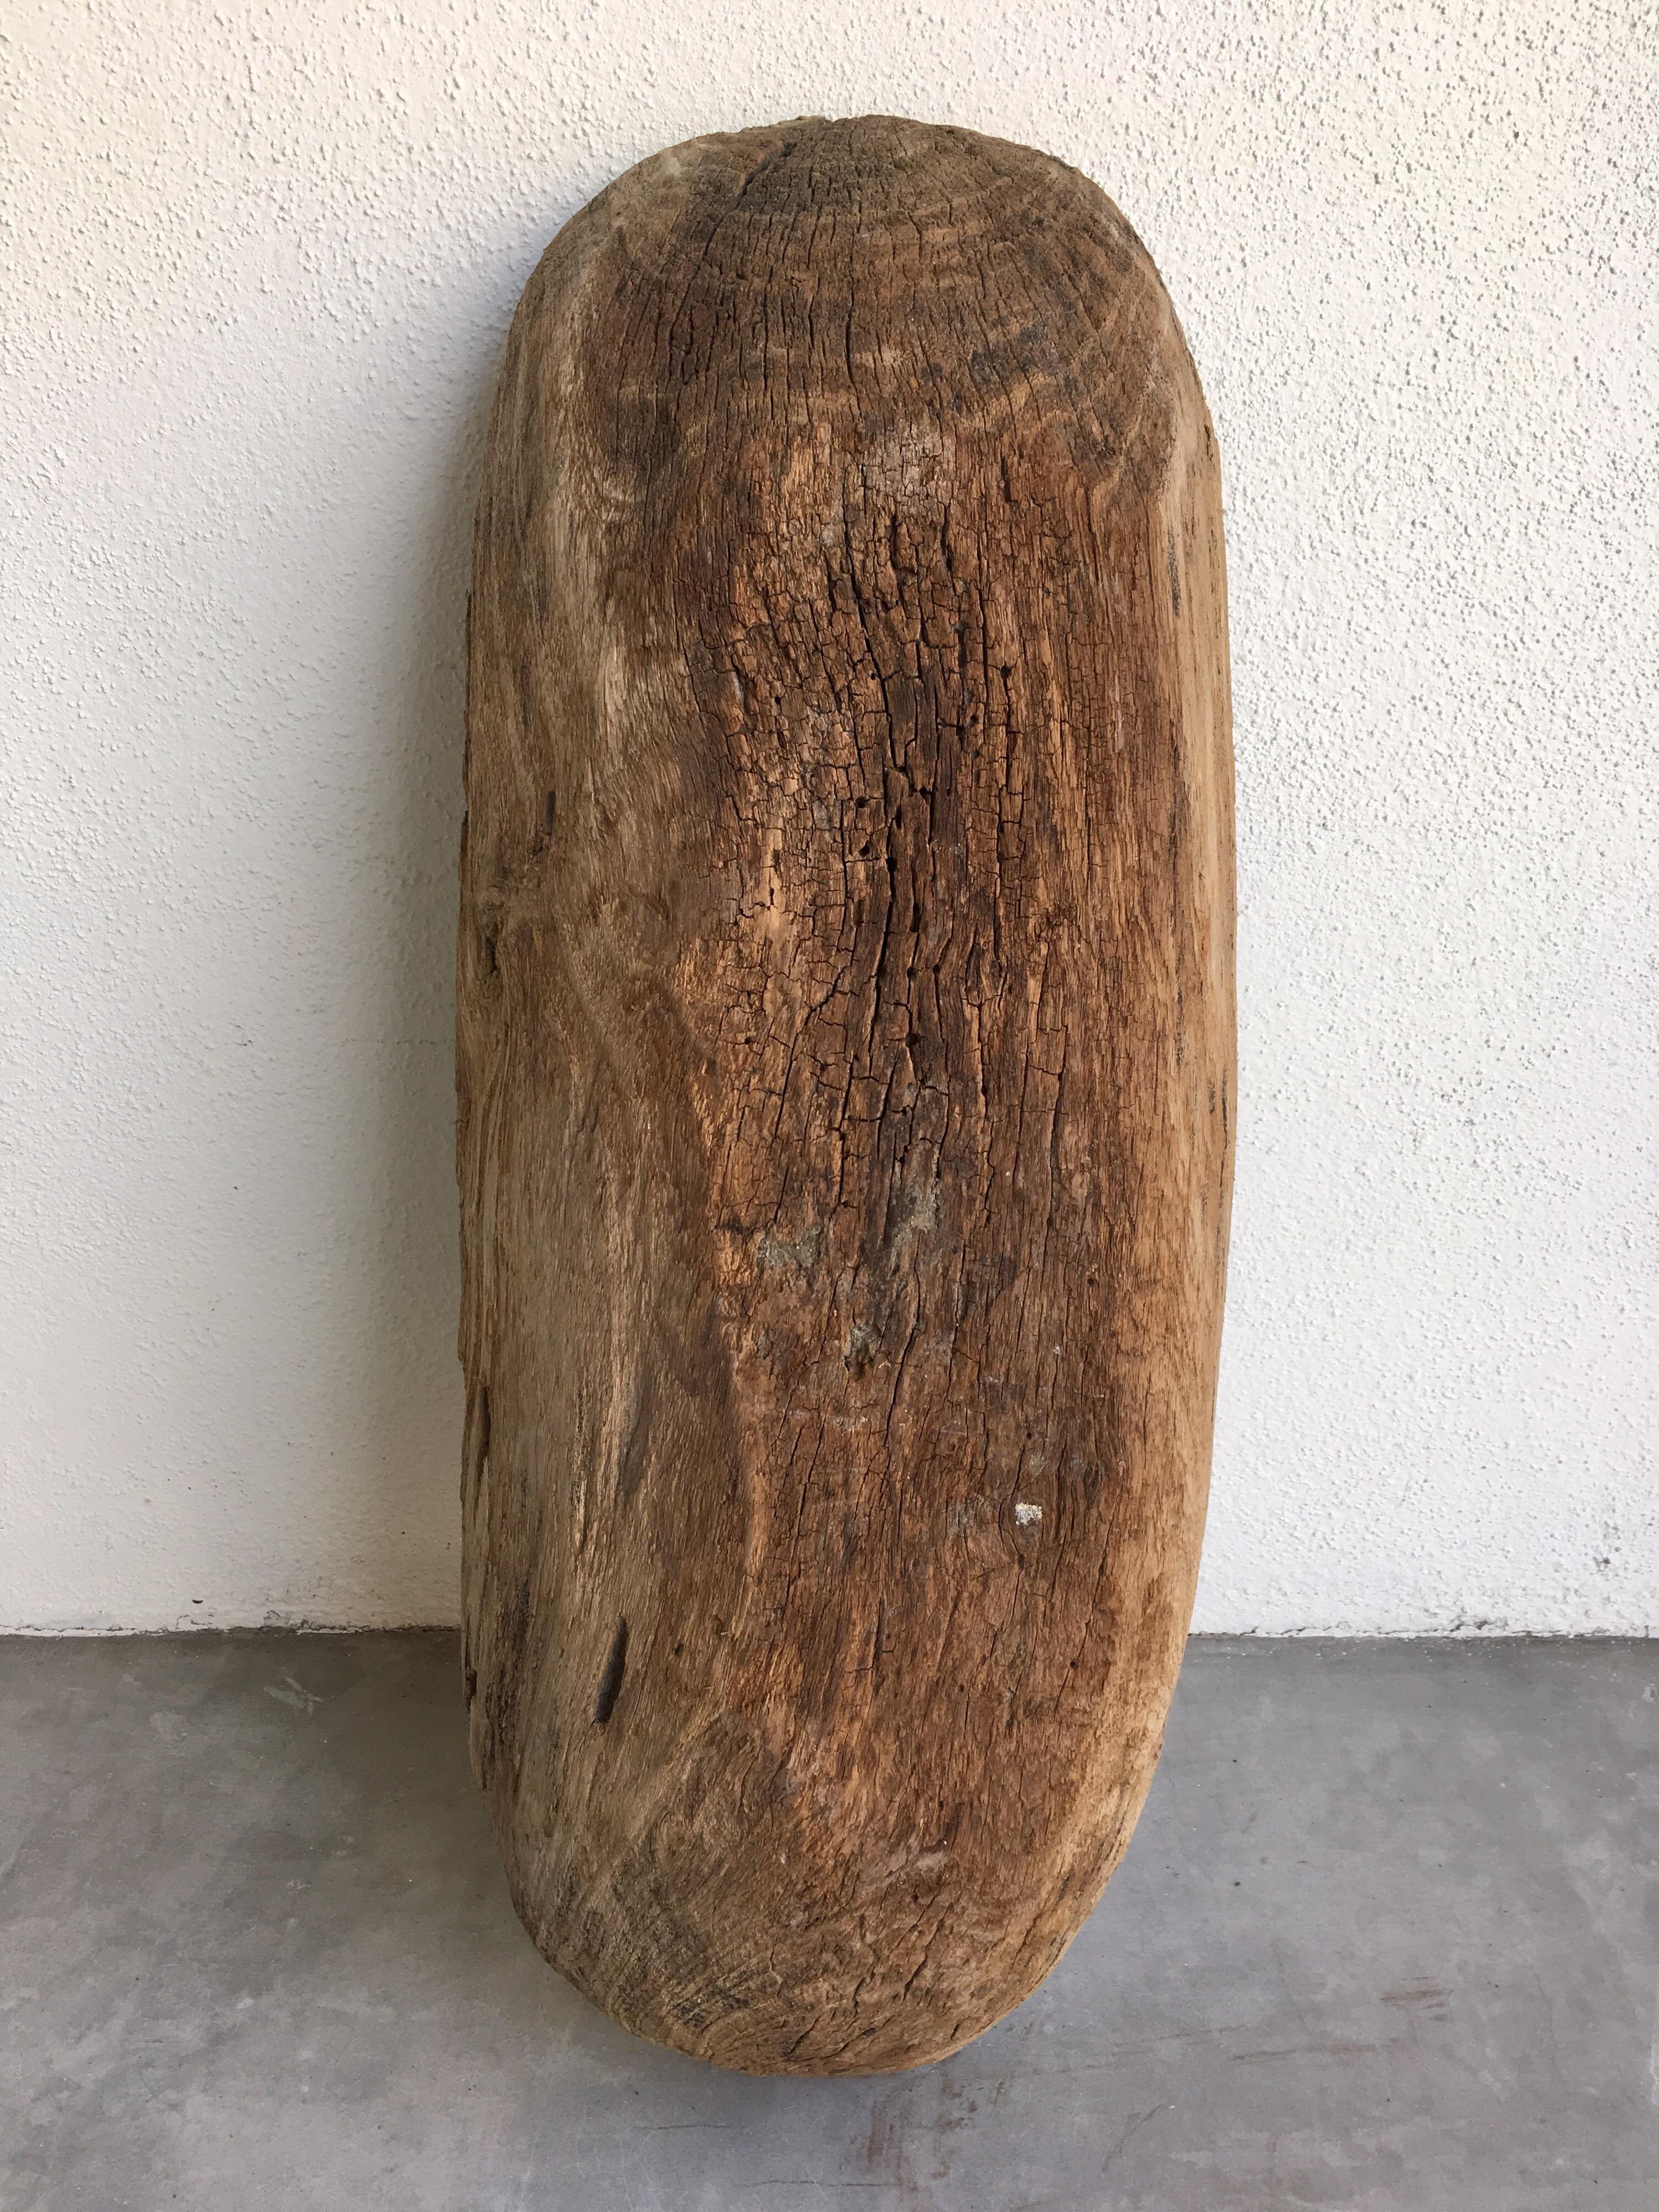 Hardwood Mesquite Bowl from Mexico